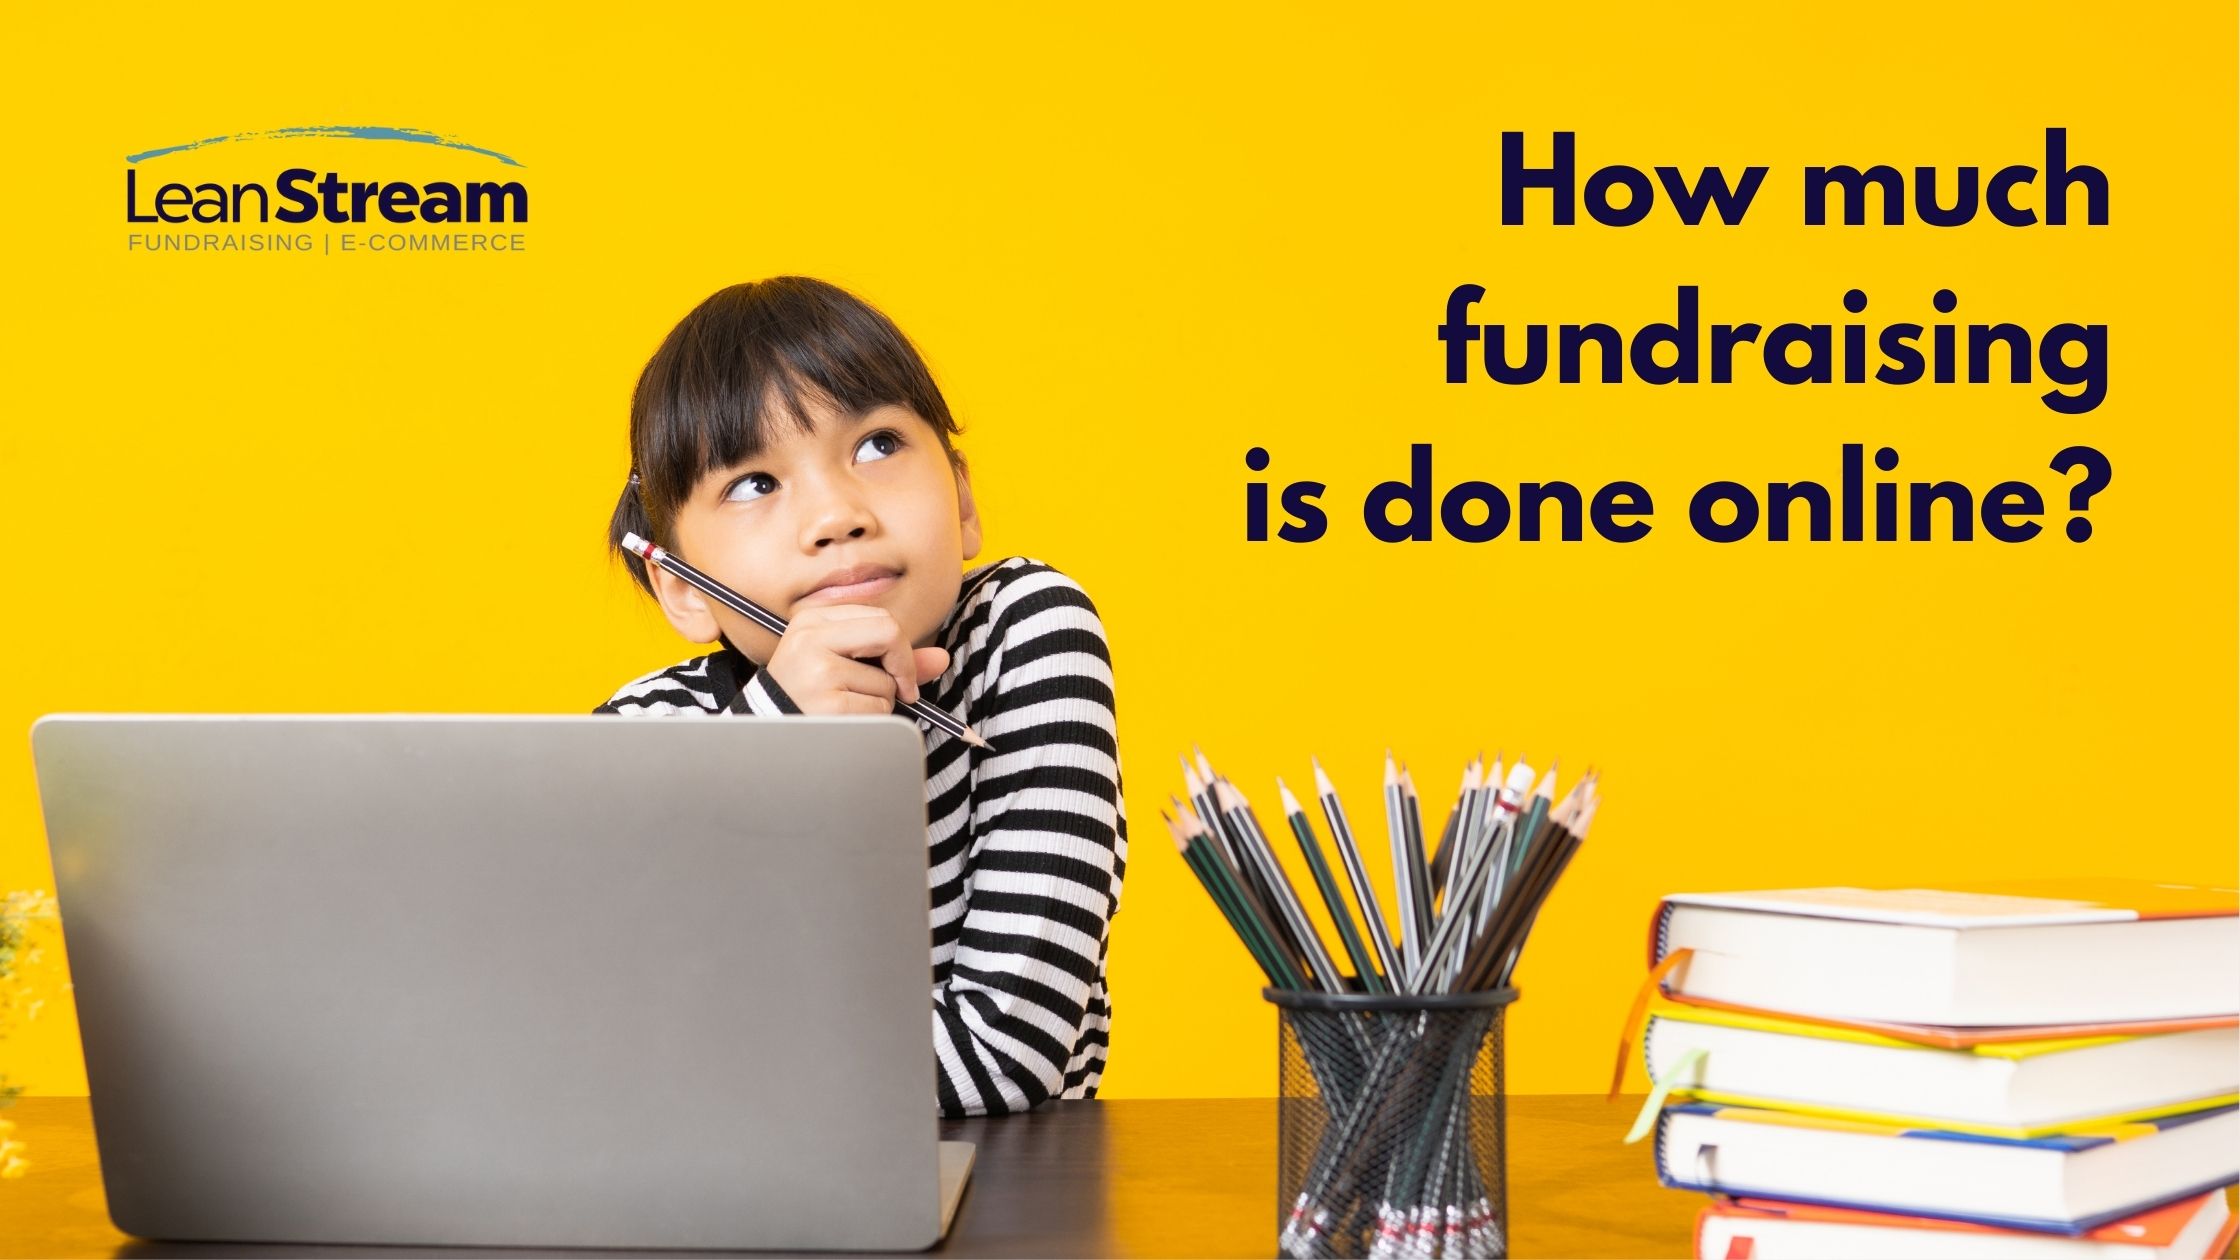 How much school fundraising is done online?